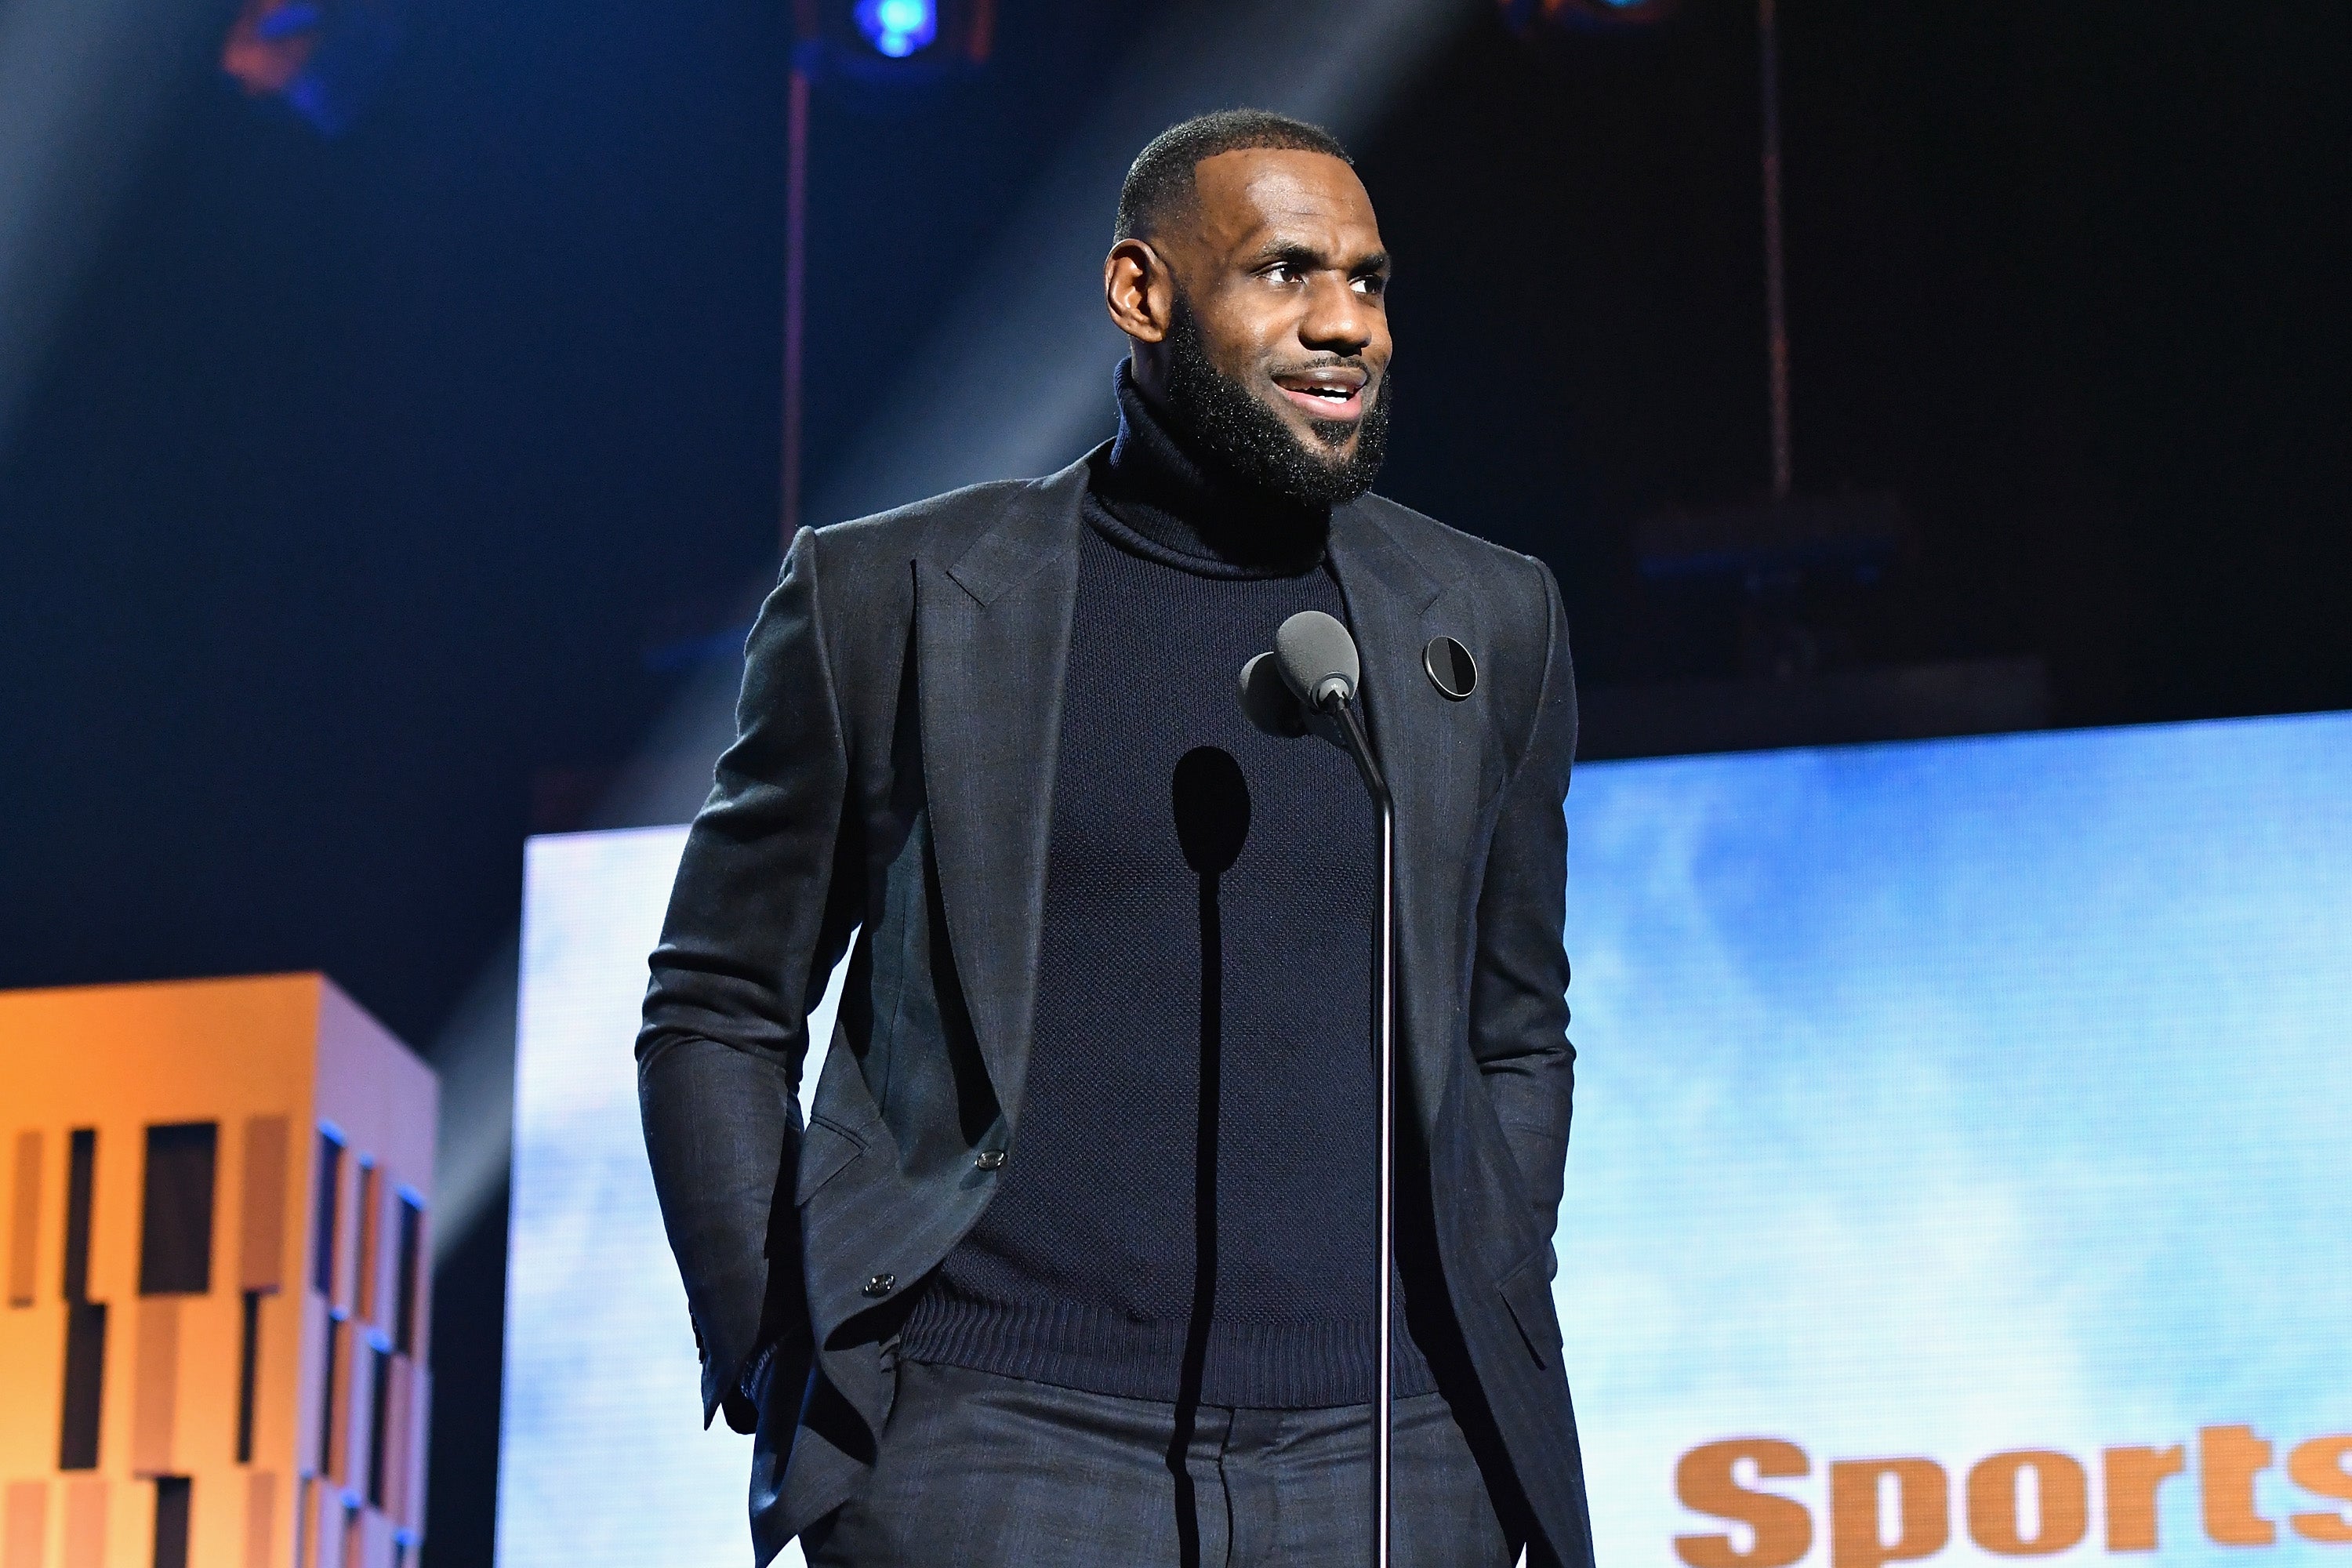 LeBron James Accepts Sports Illustrated Sportsperson of the Year Award: ‘This is Much Bigger Than Me’